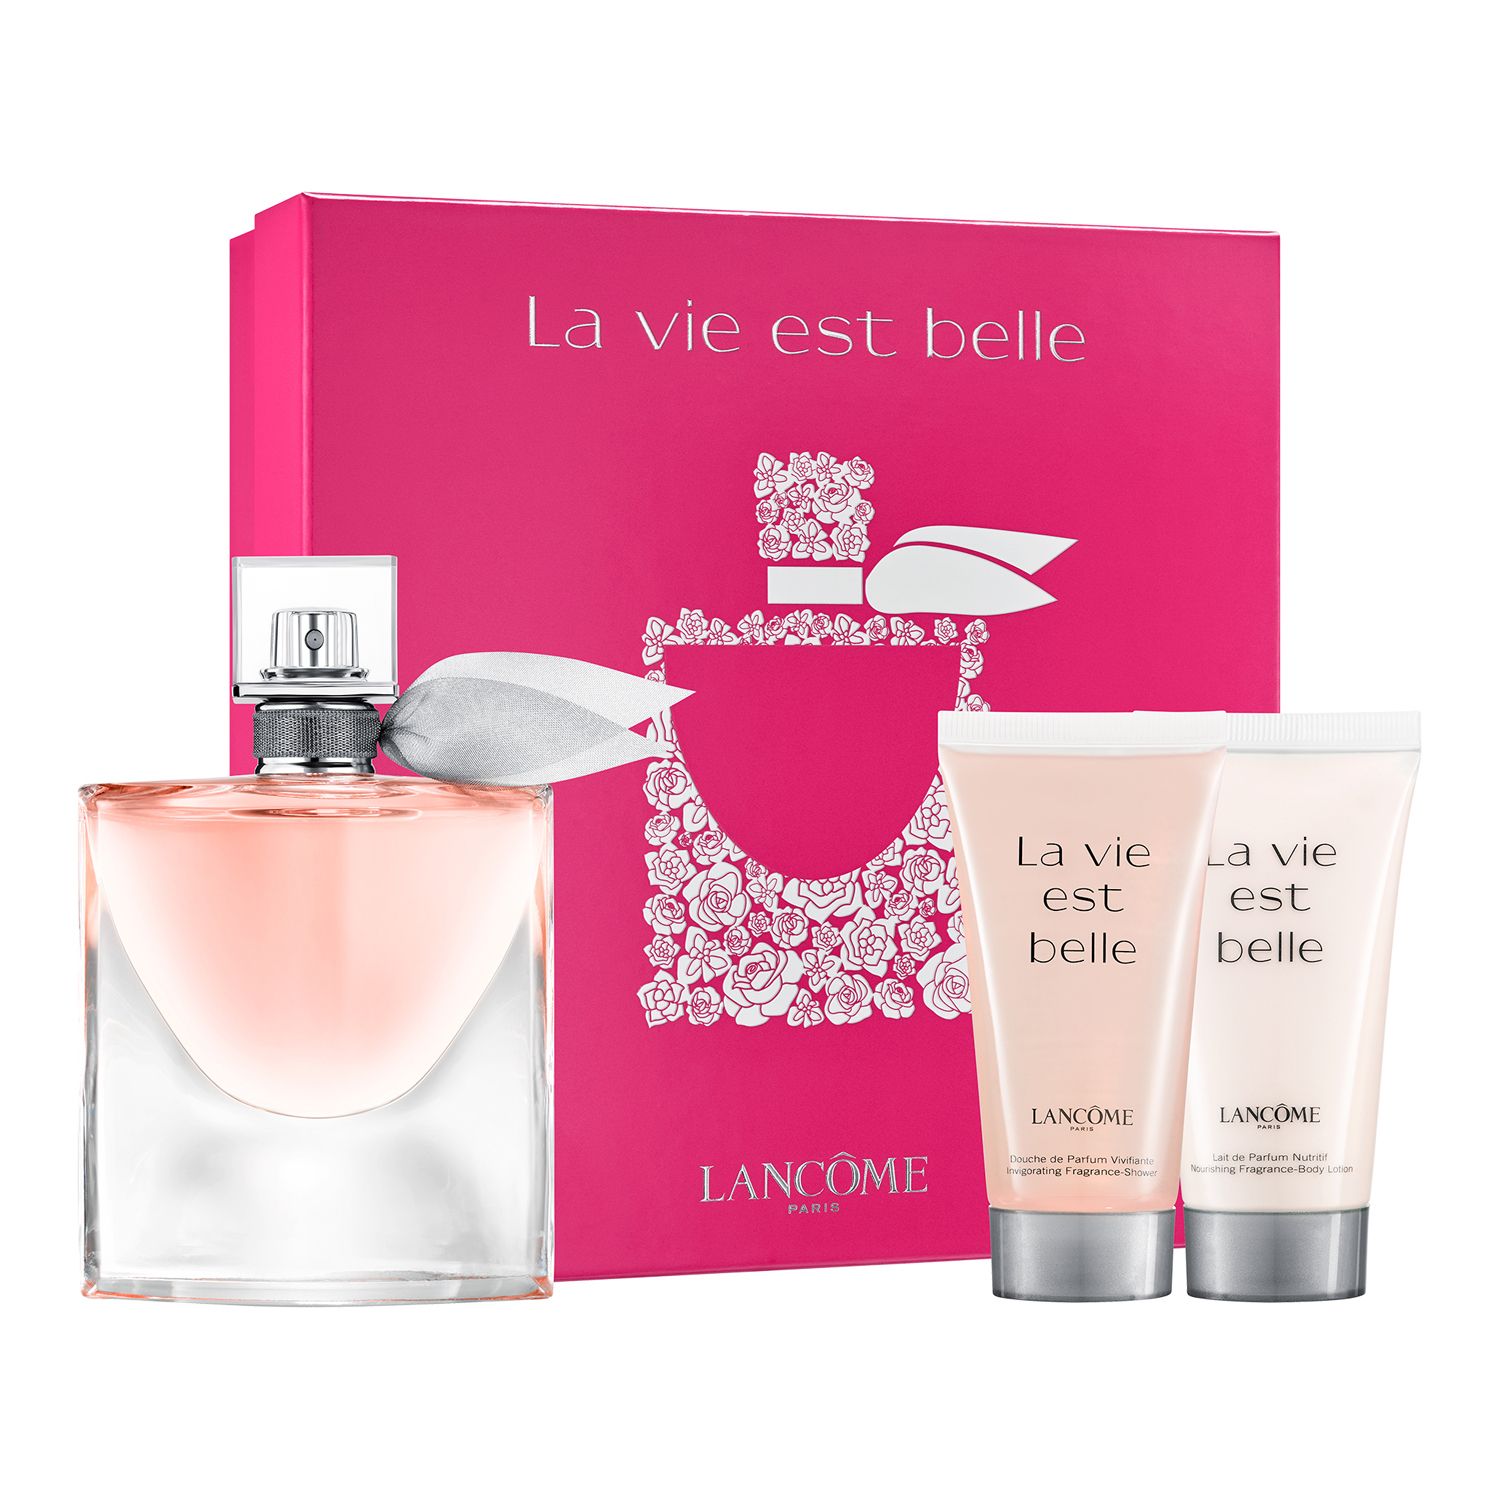 perfume gift sets sale for her